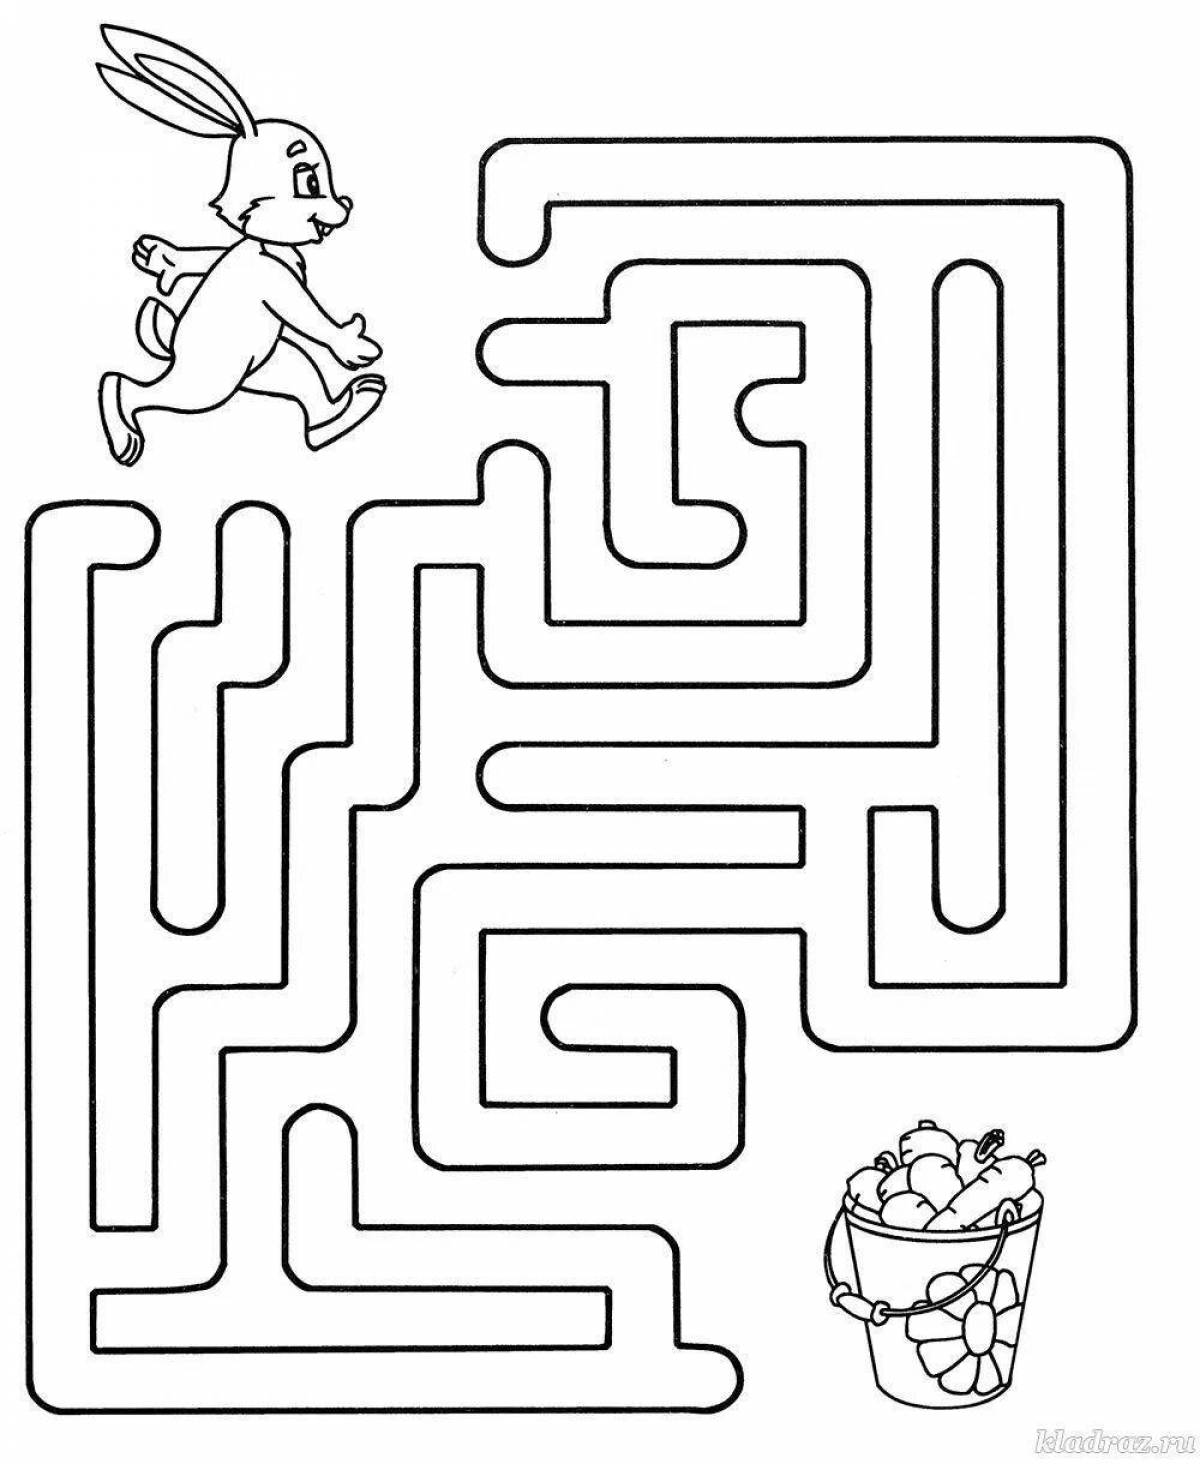 Colourful coloring maze for children 4 years old